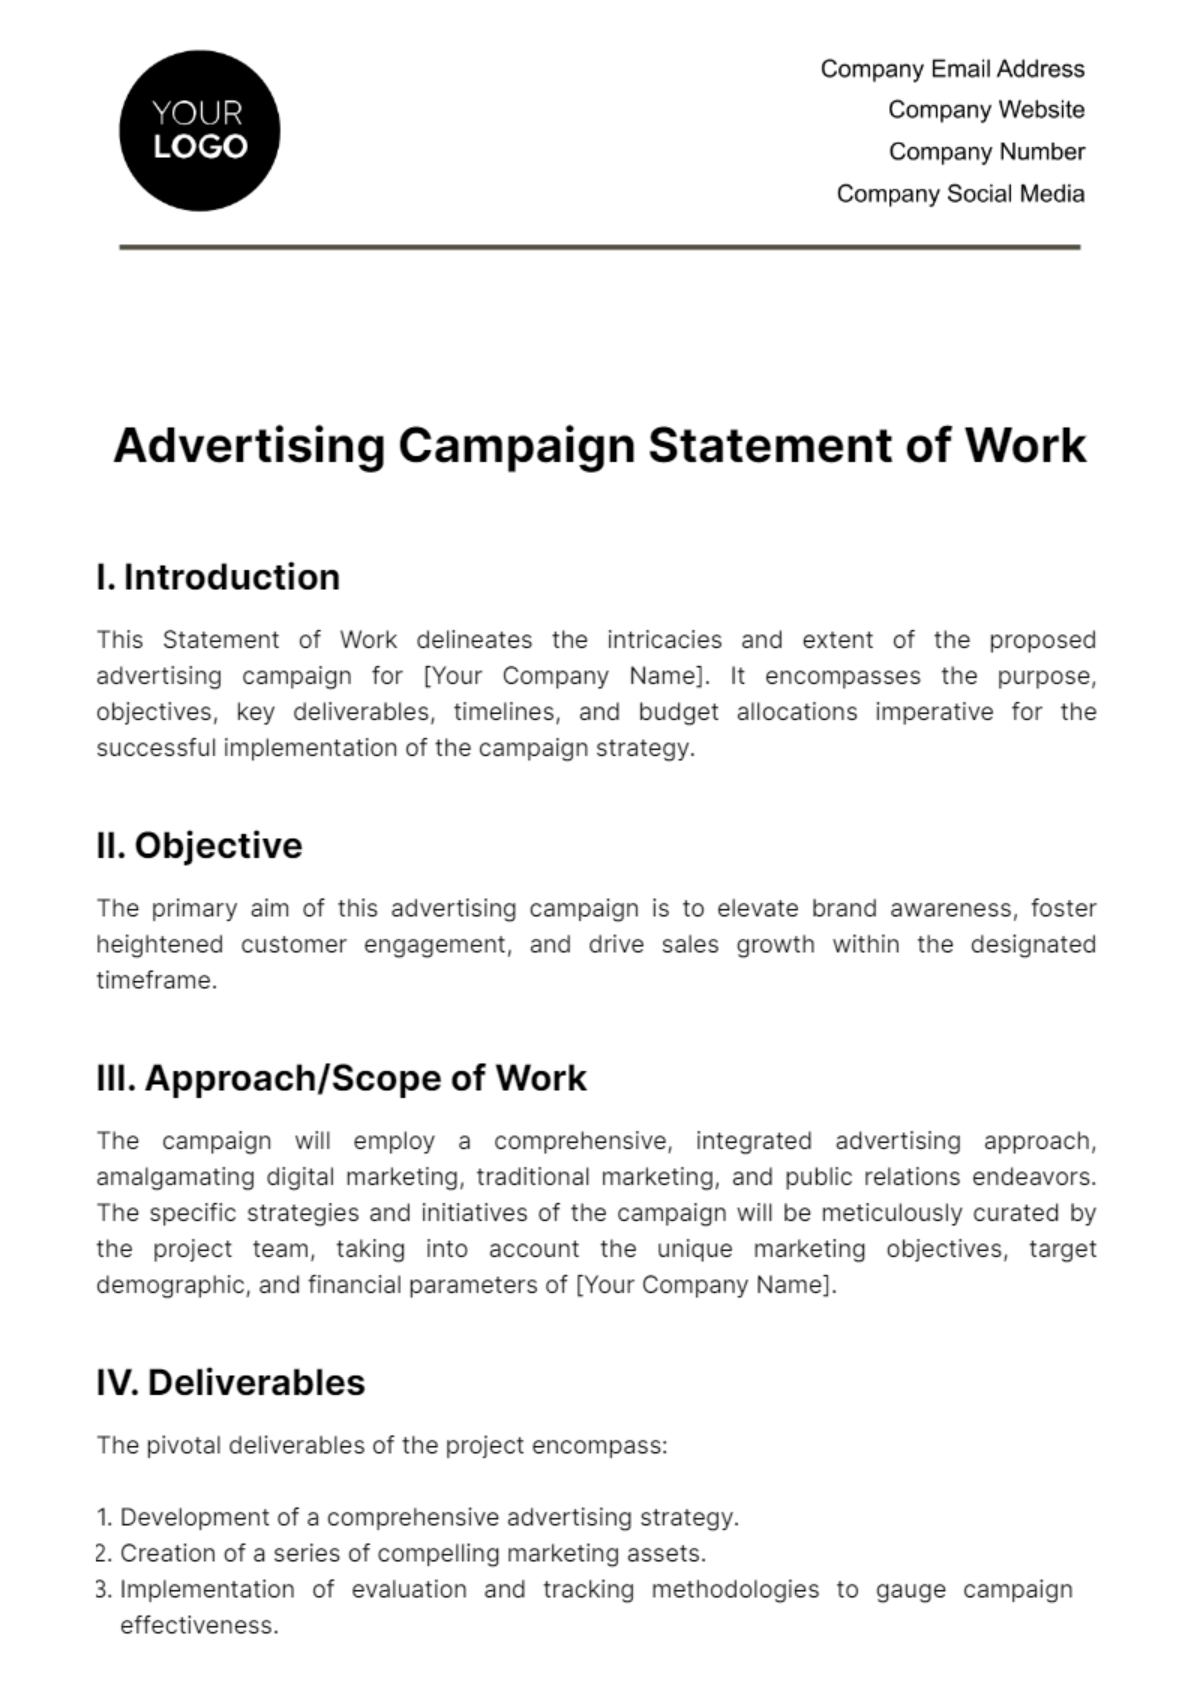 Advertising Campaign Statement of Work Template